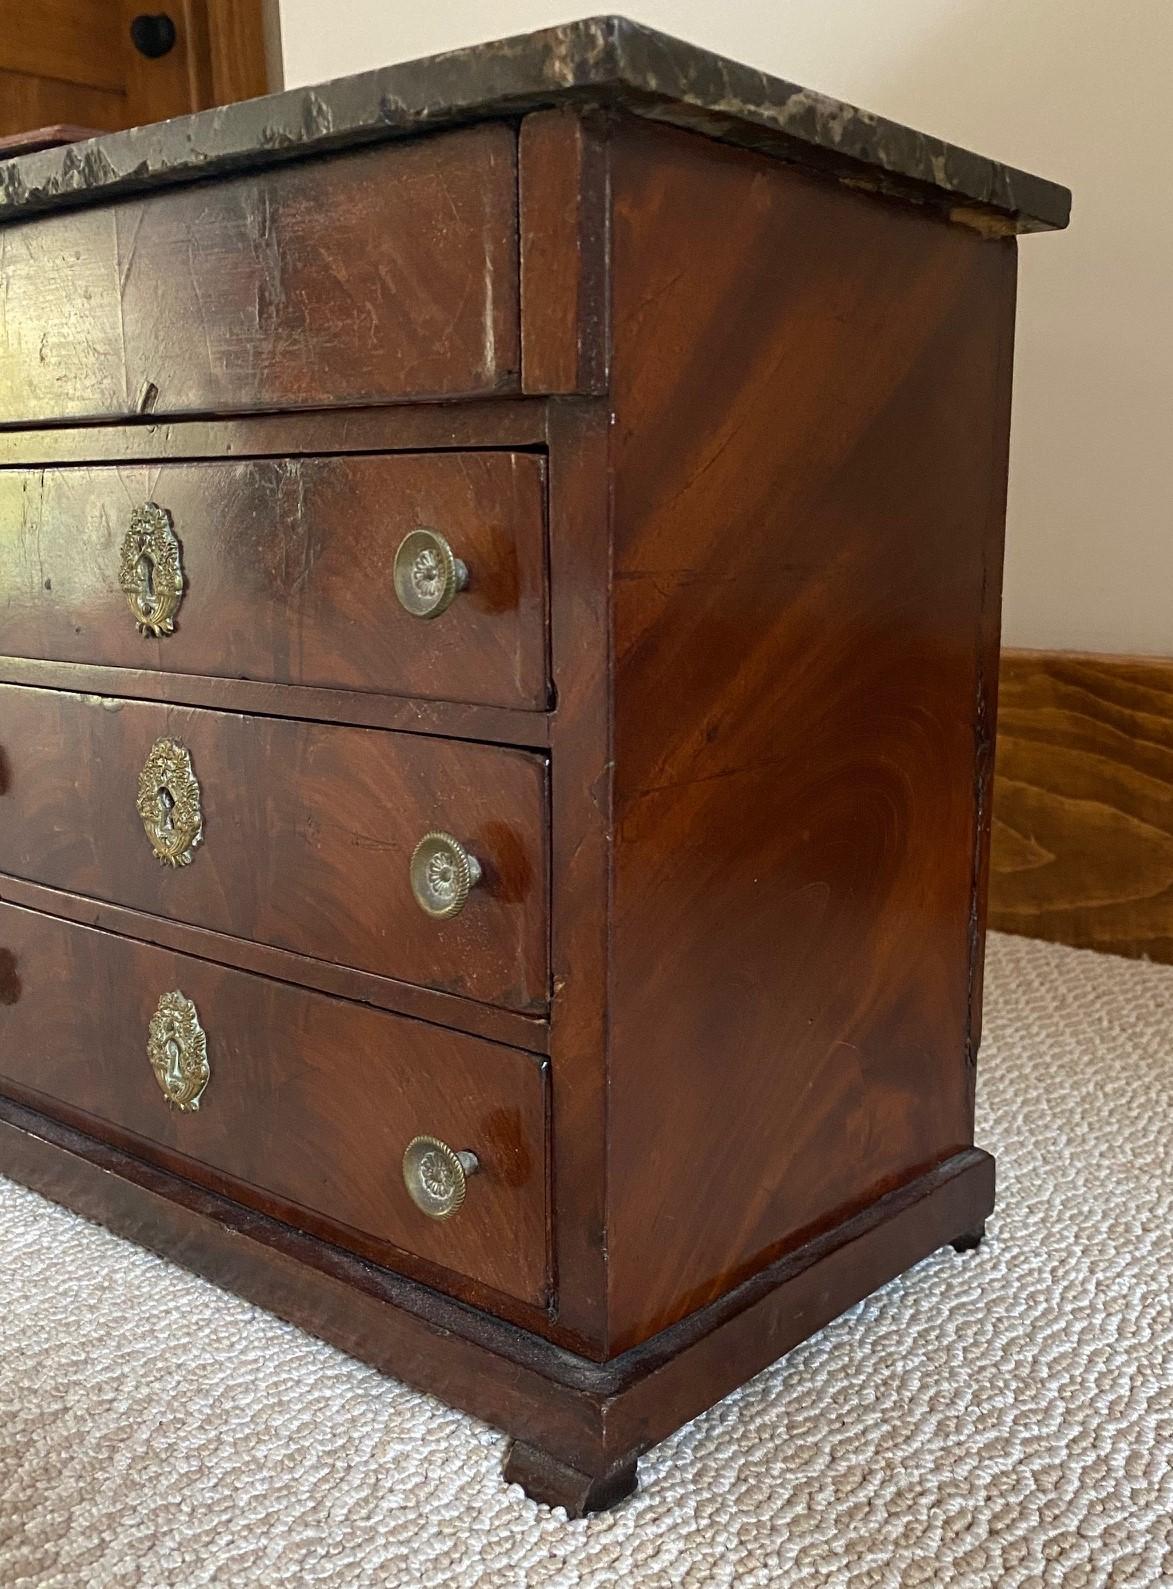 19th c. Charming antique miniature chest of drawers. The chest has a marble top. The case is figured mahogany, with four stacked drawers, the bottom three mounted with brass pulls and escutcheon.

Dimensions: 11.5